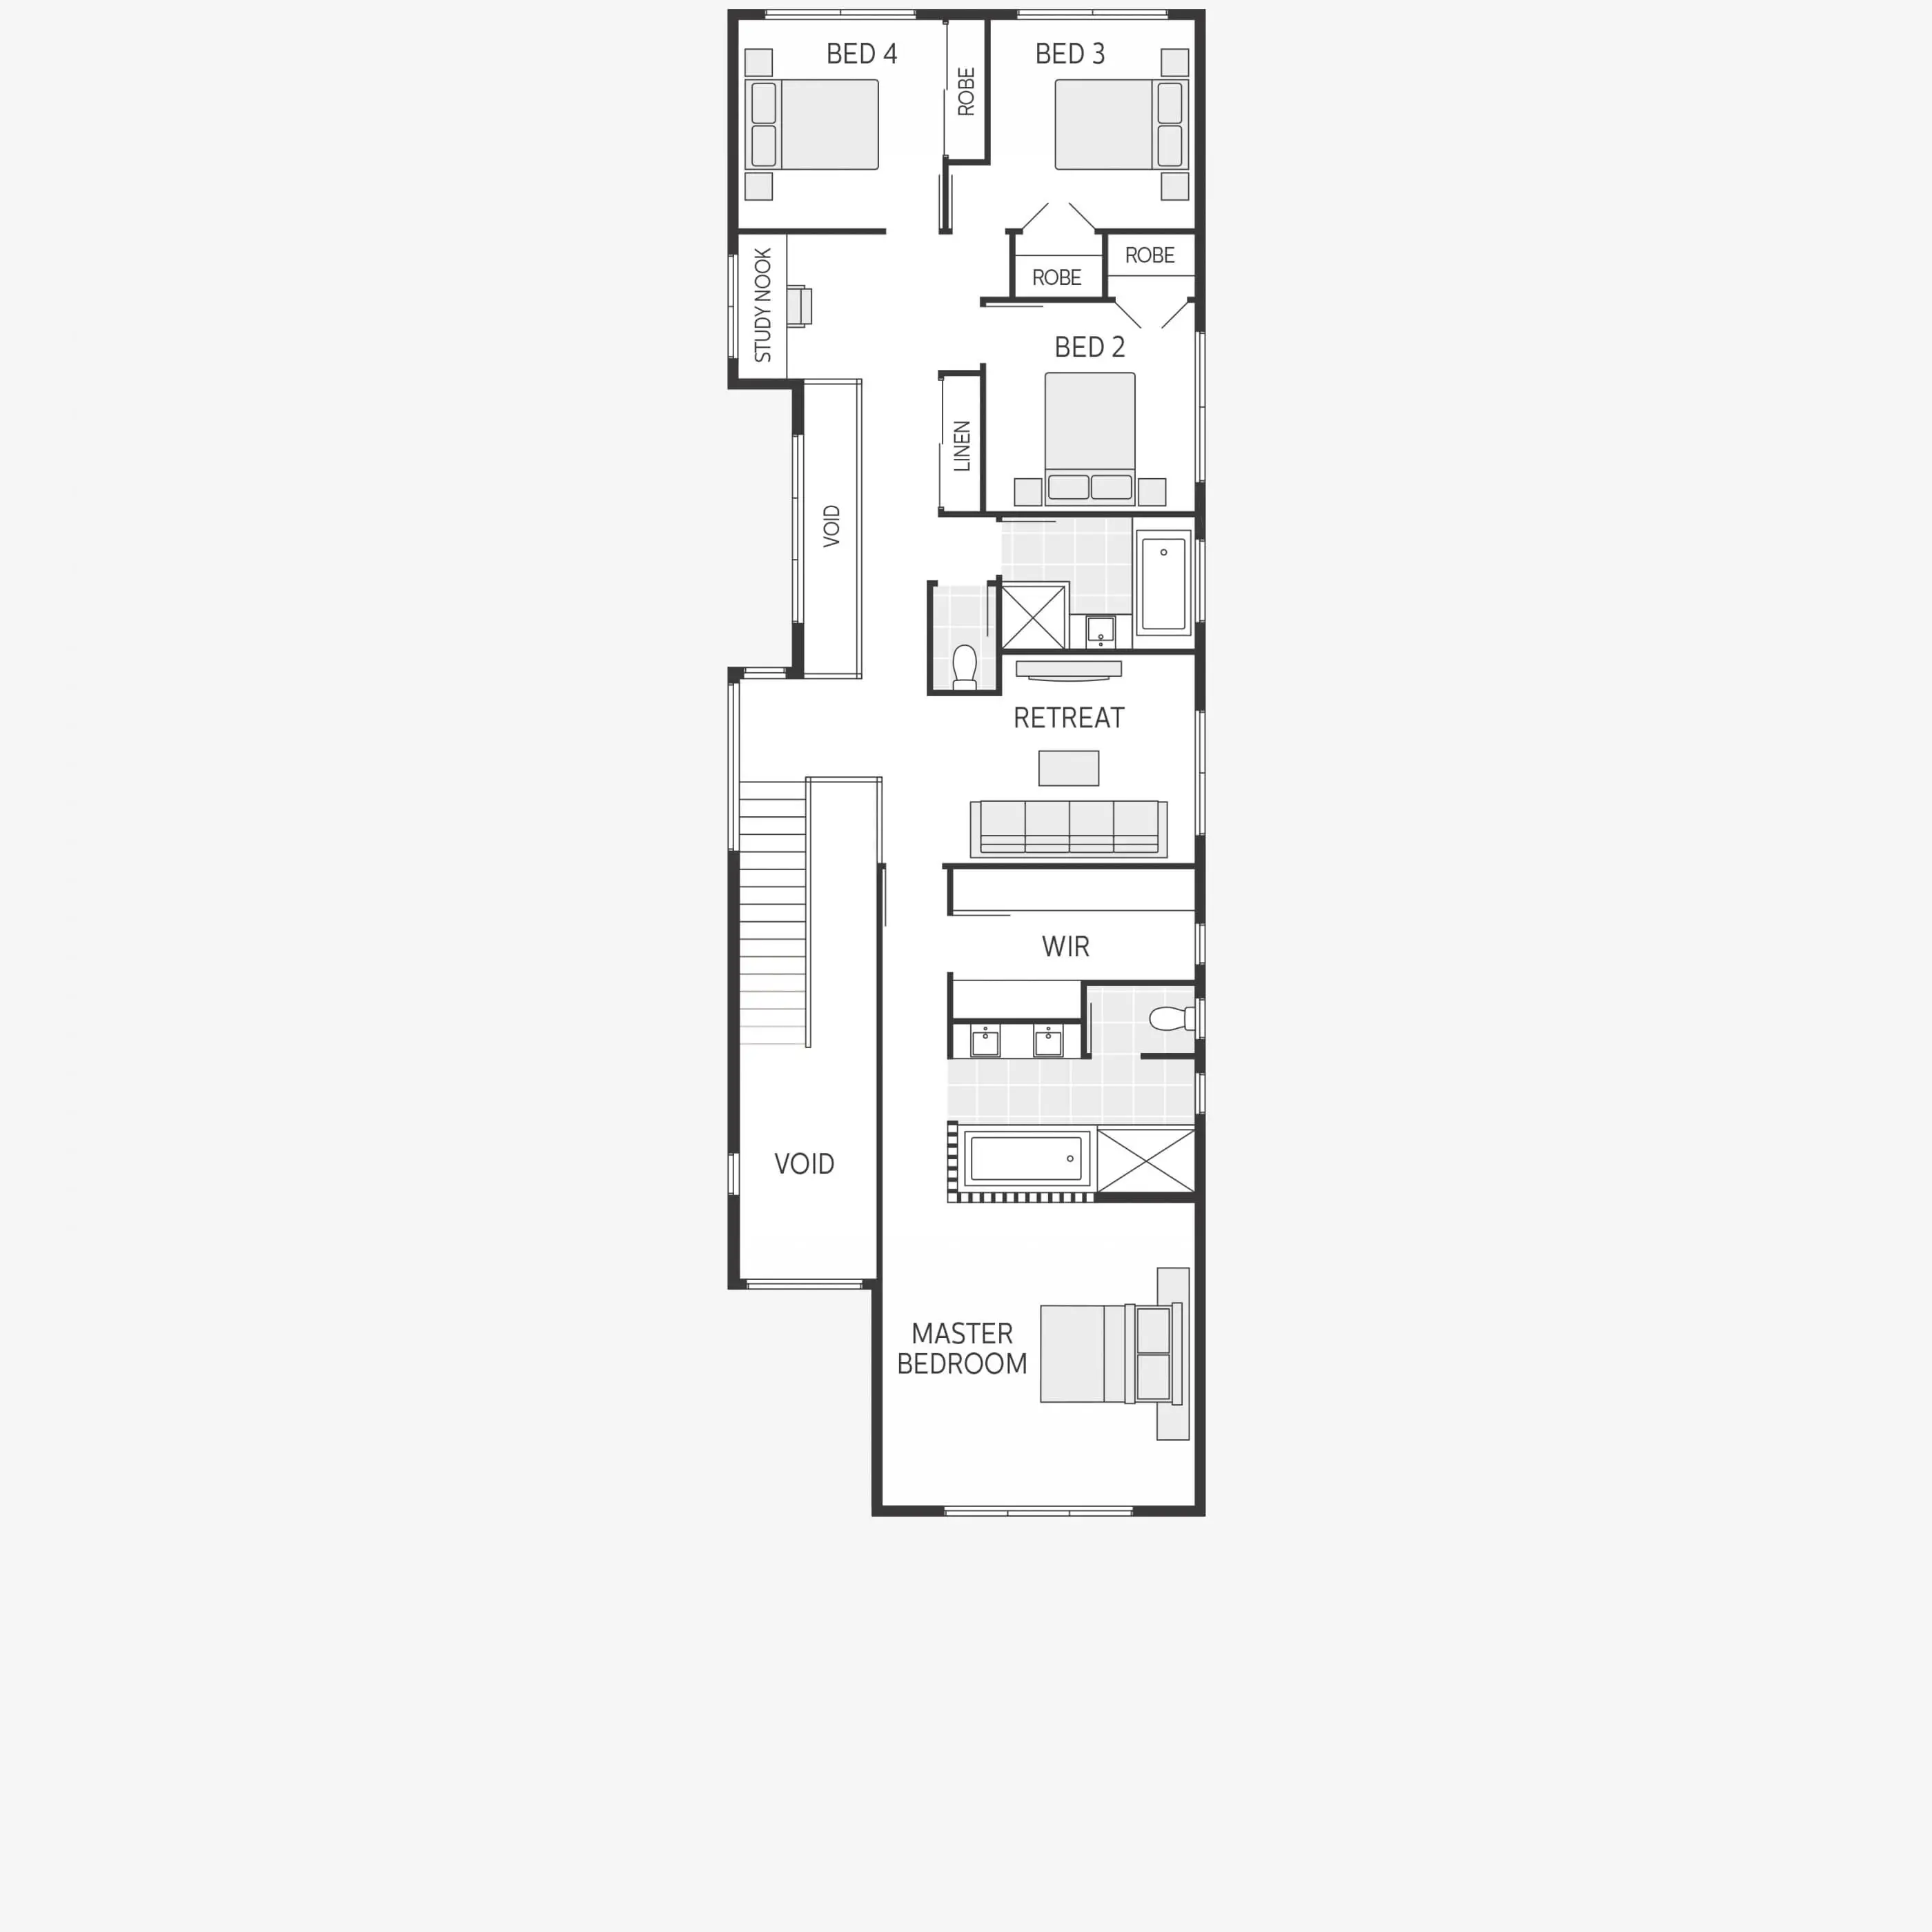 Two-story small house plan